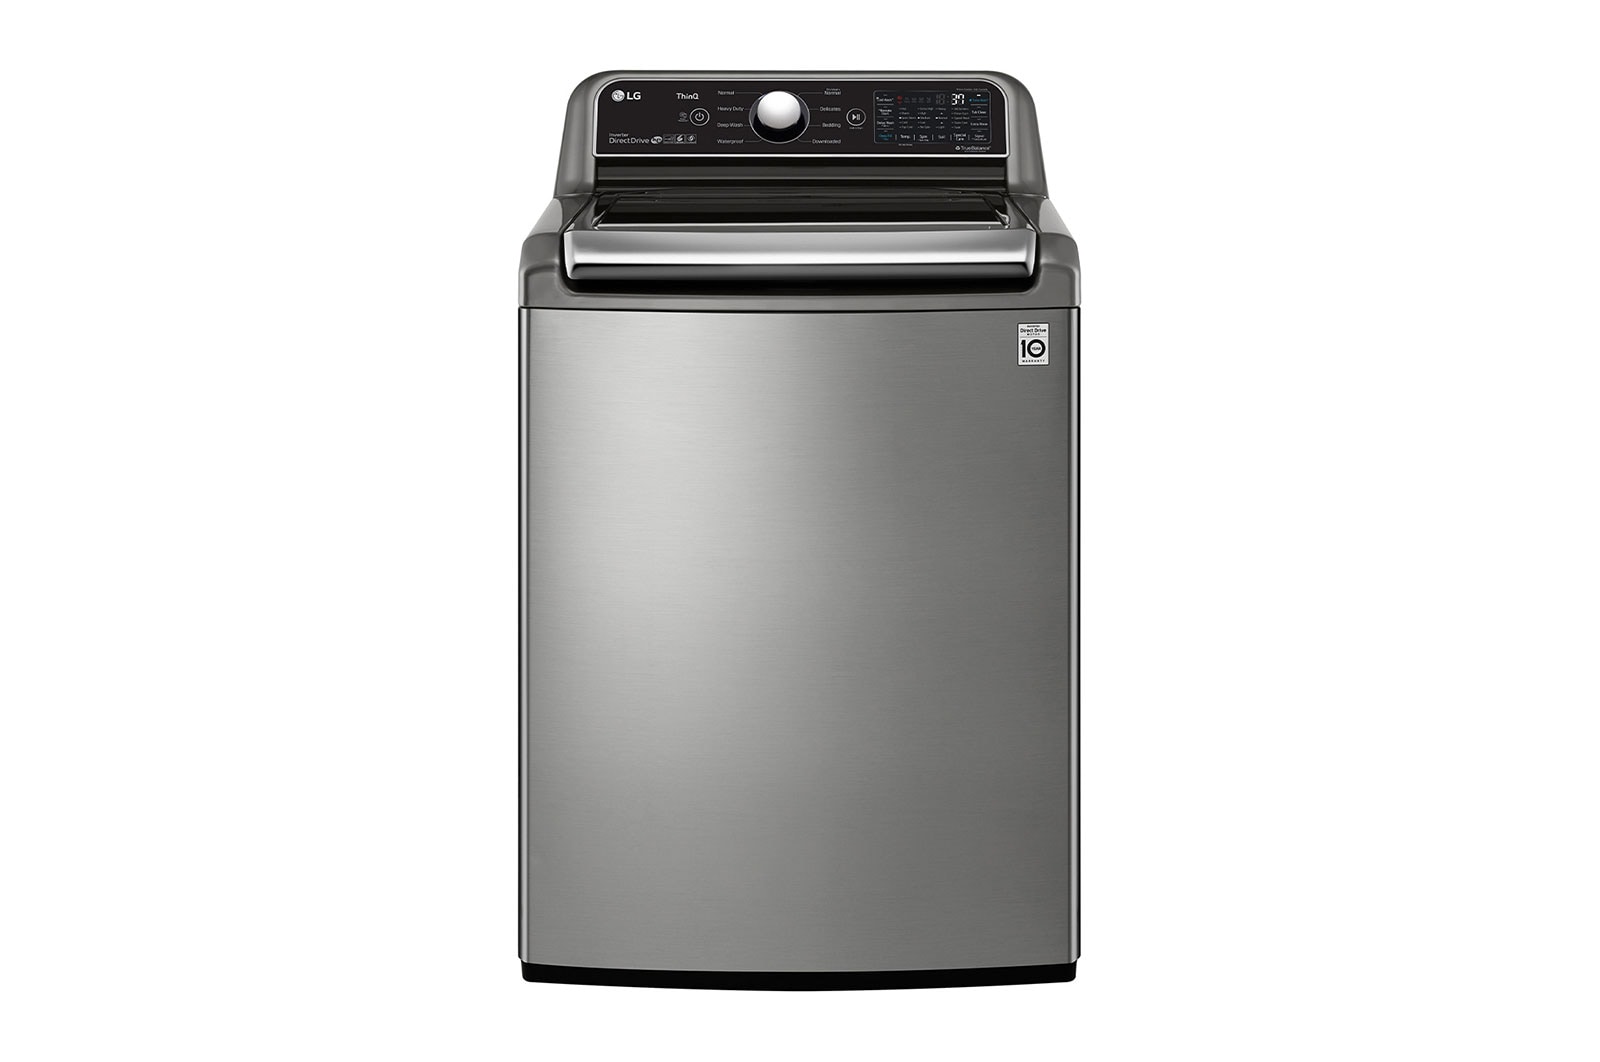 LG 5.6 cu. ft. Mega Capacity Smart WiFi Enabled Top Load Washer with Agitator and TurboWash3D™ Technology, WT7305CV